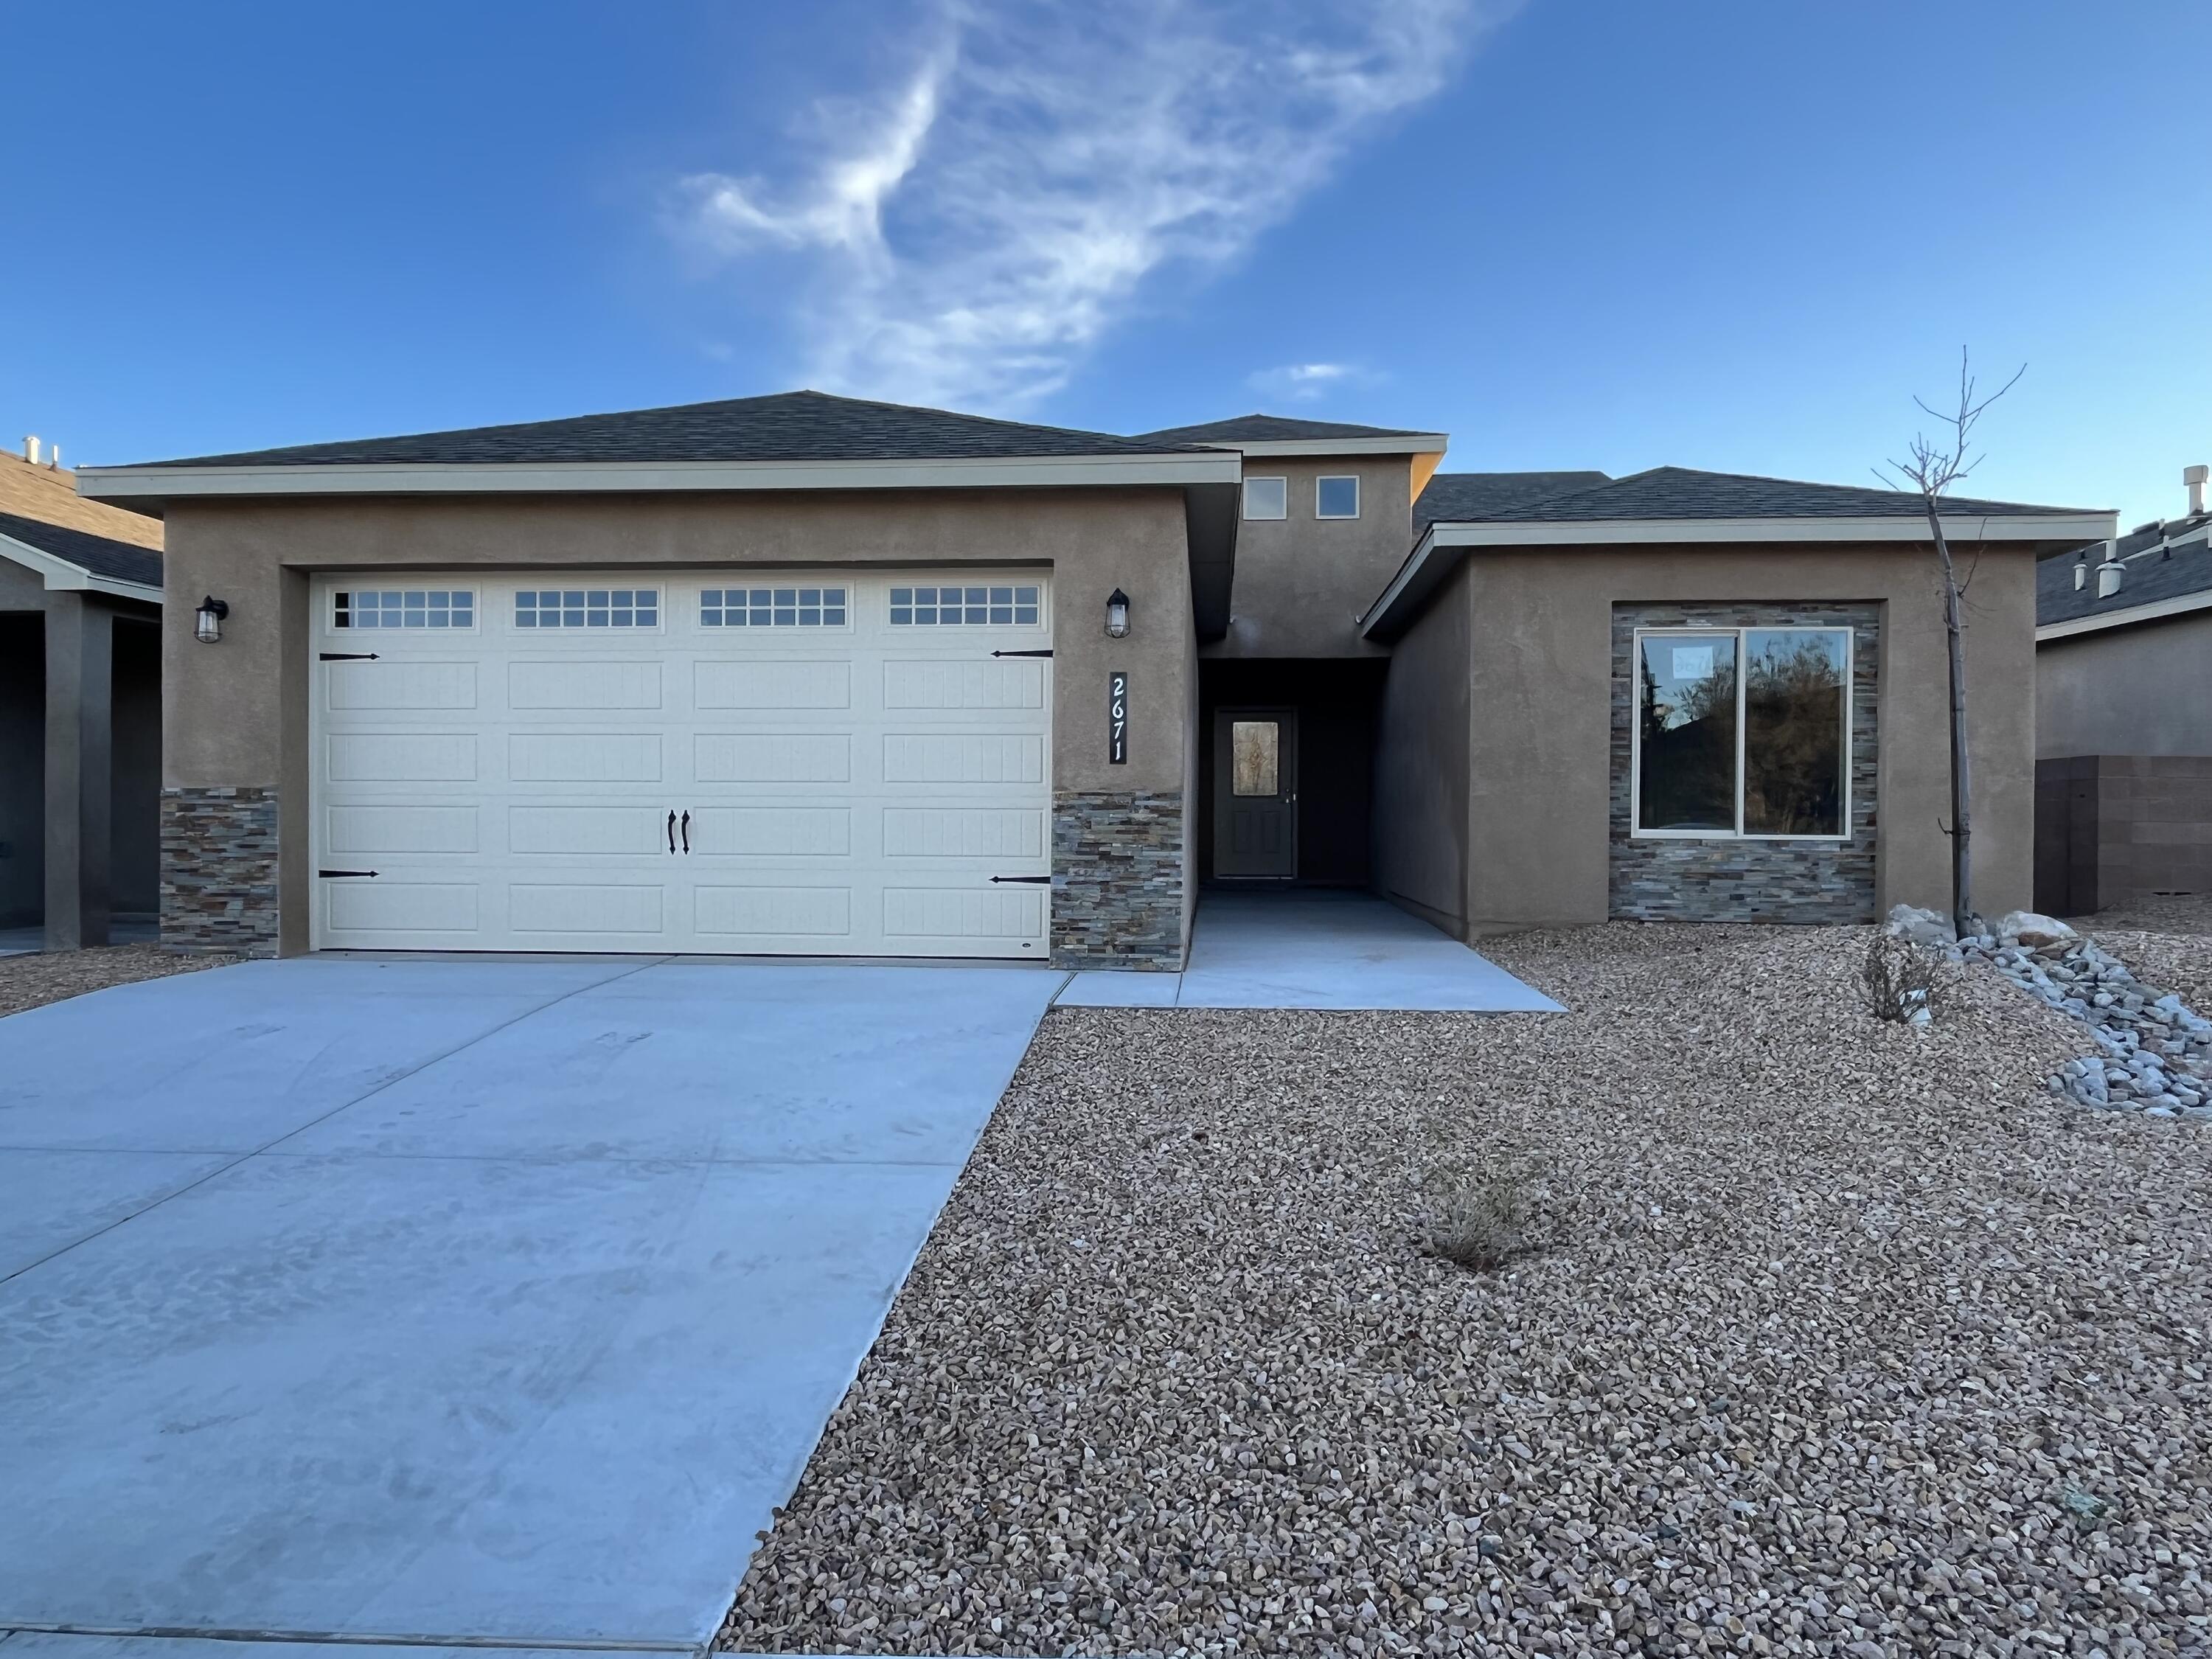 Stunning new construction home in one of the few Los Lunas gated communities! Take a look as you walk into the large entryway with overhead lighting and modern tile that flows into the large living room, centered with a gas fireplace and mantel. The kitchen not only has clean white cabinets and beautiful backsplash but plenty of space for a bar top, perfect for many uses. BONUS this home is built on an upgraded post tension slab. Schedule your showing today! -Pictures are of same floor plan but previous home built, colors are subject to change.